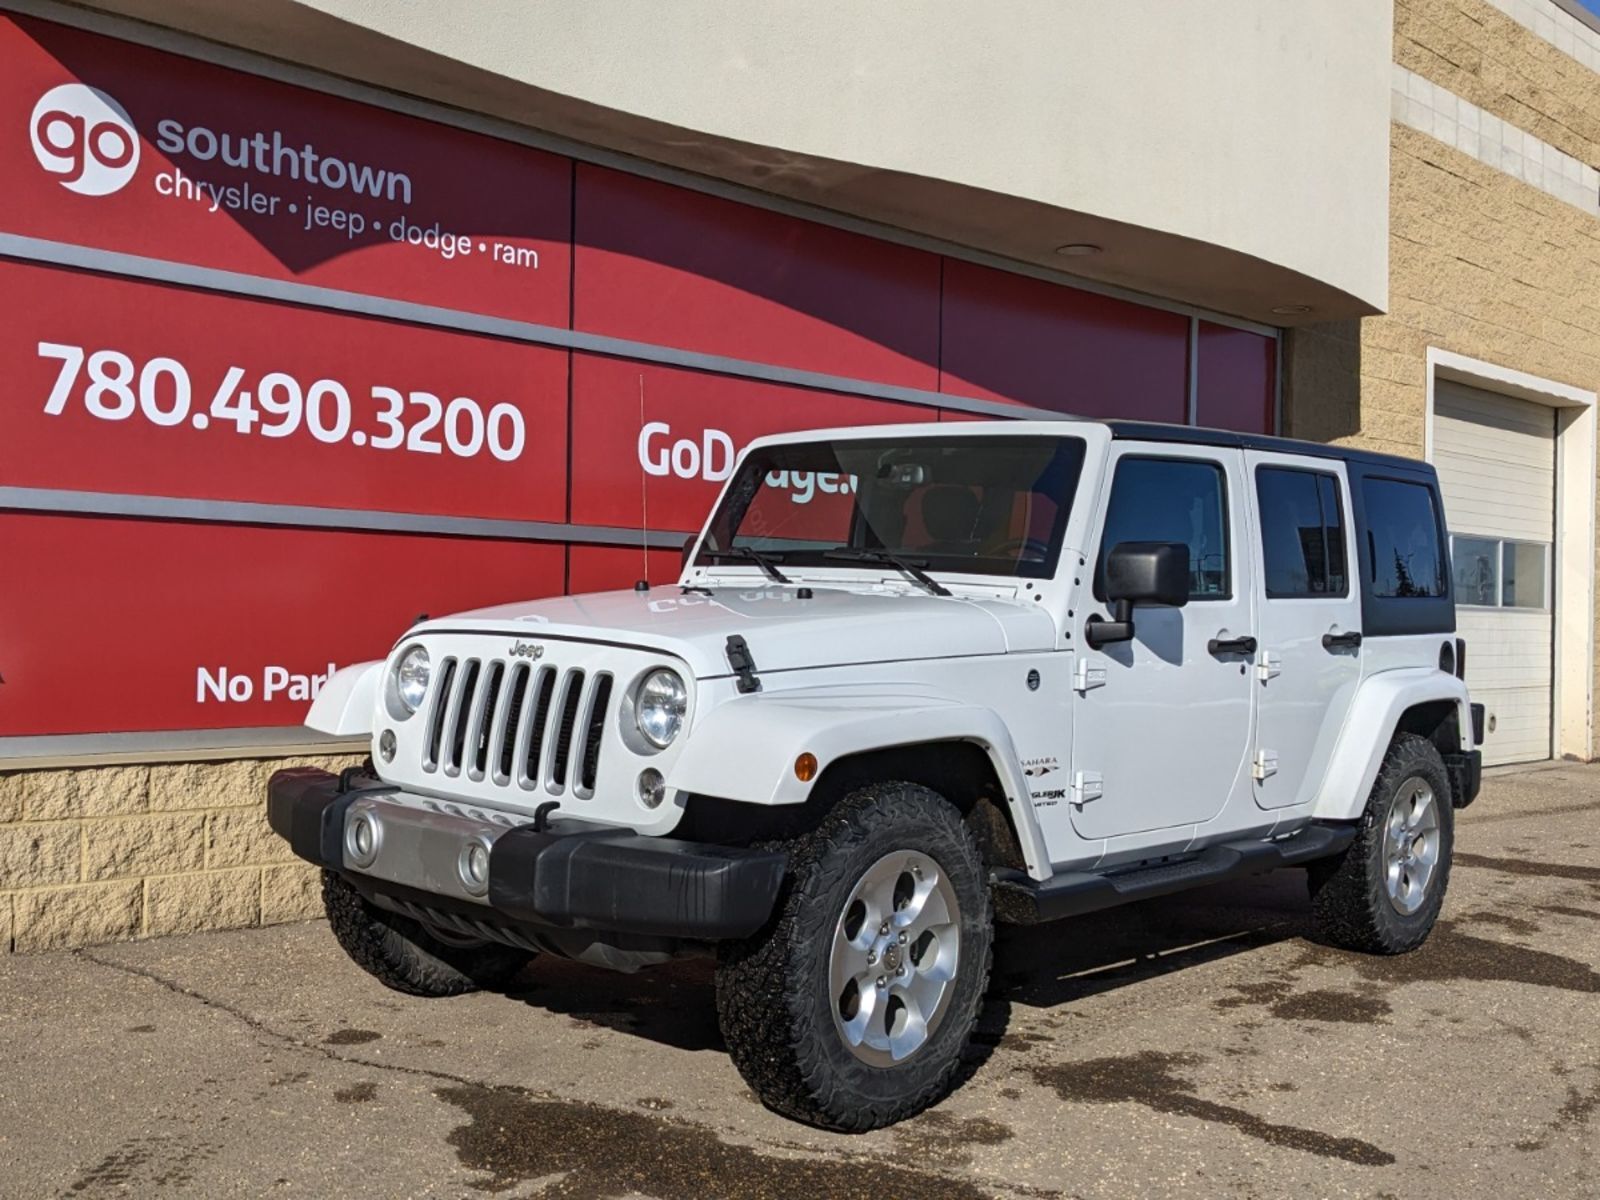 2018 Jeep Wrangler JK Unlimited  UNLIMITED SAHAR IN BRIGHT WHITE EQUIPPED WITH A 3